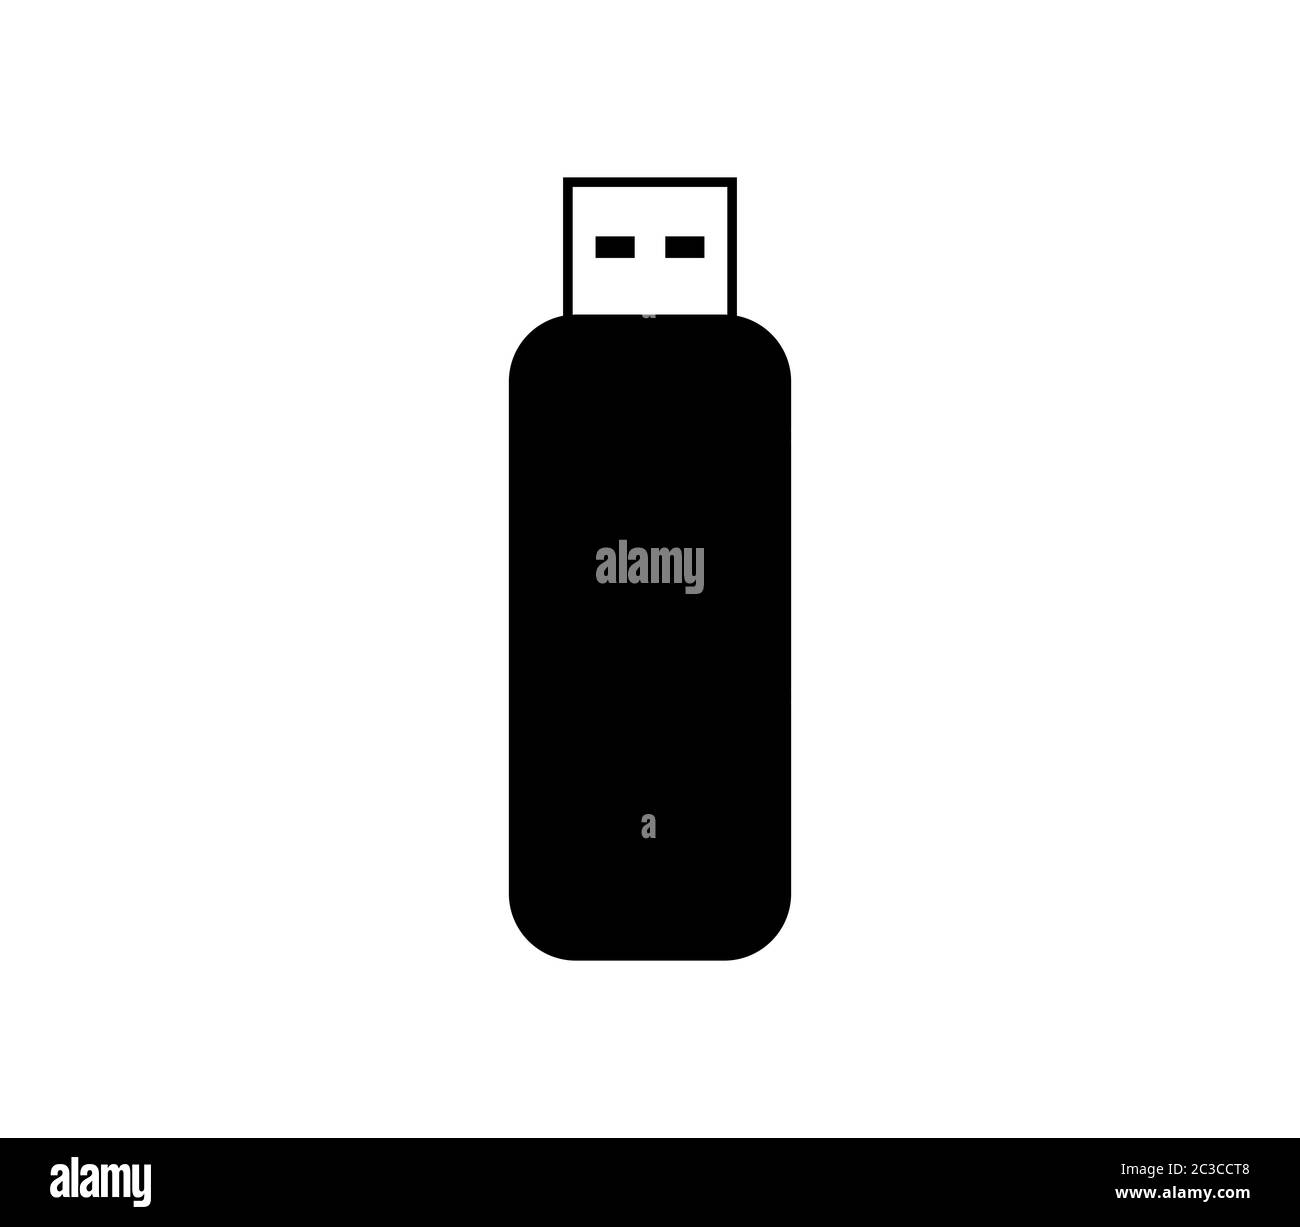 usb drive icon illustrated in vector on white background Stock Photo